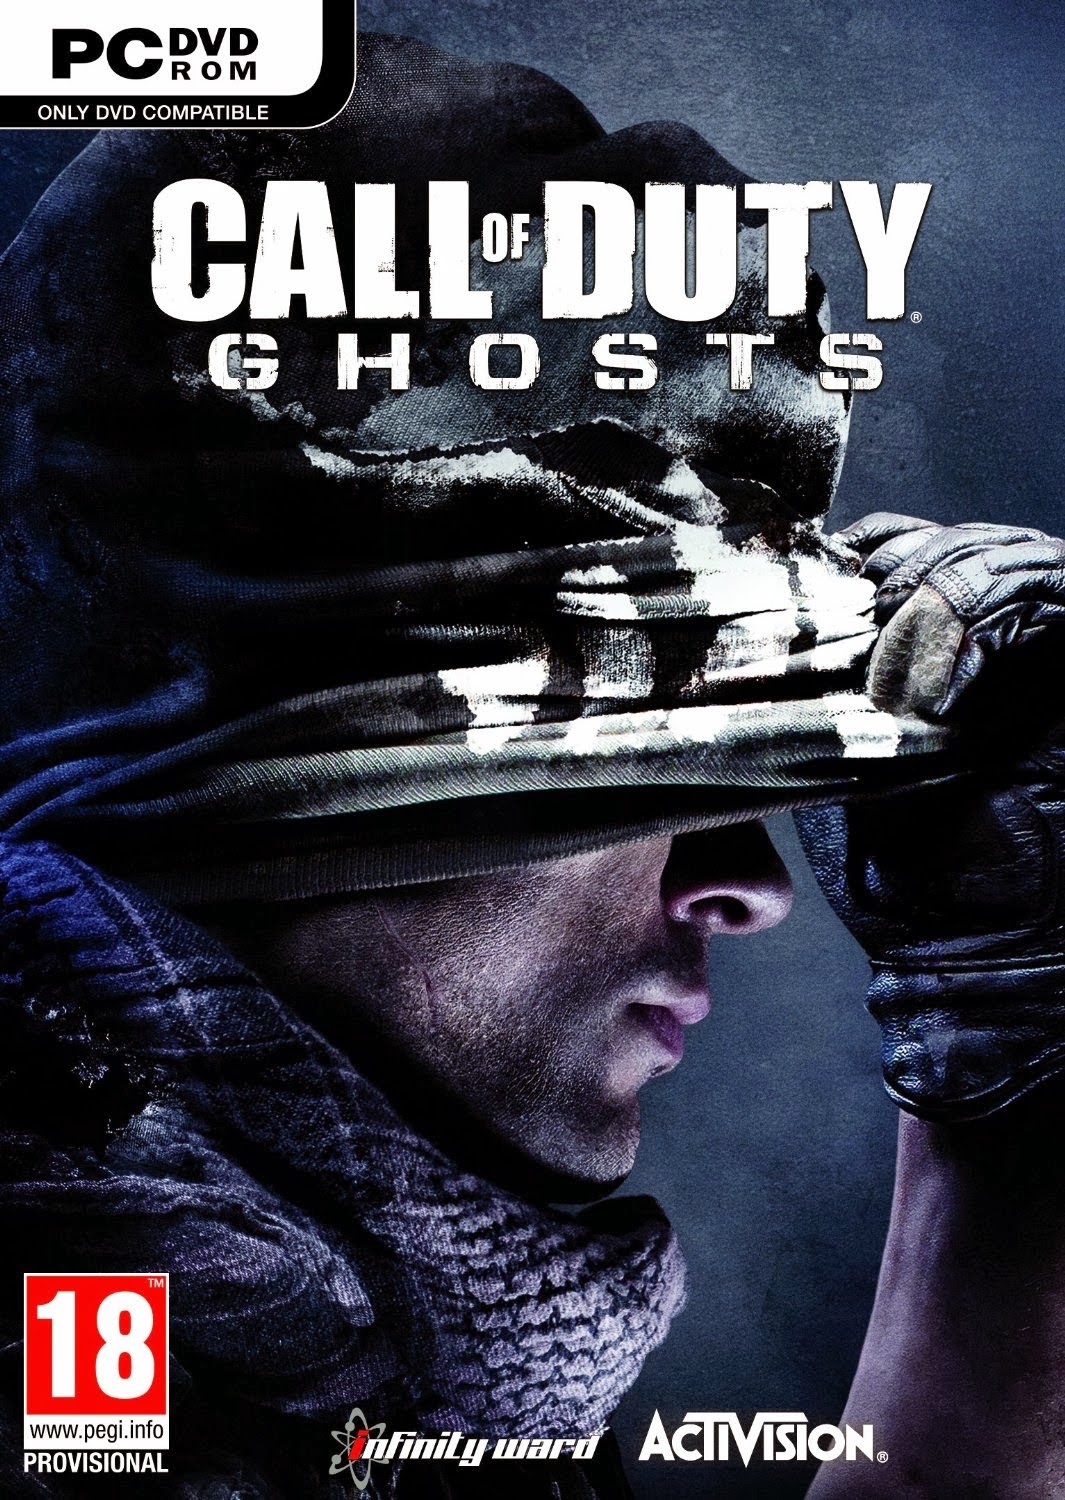 Download Gratis Call of Duty: Ghosts PC Game Full Version